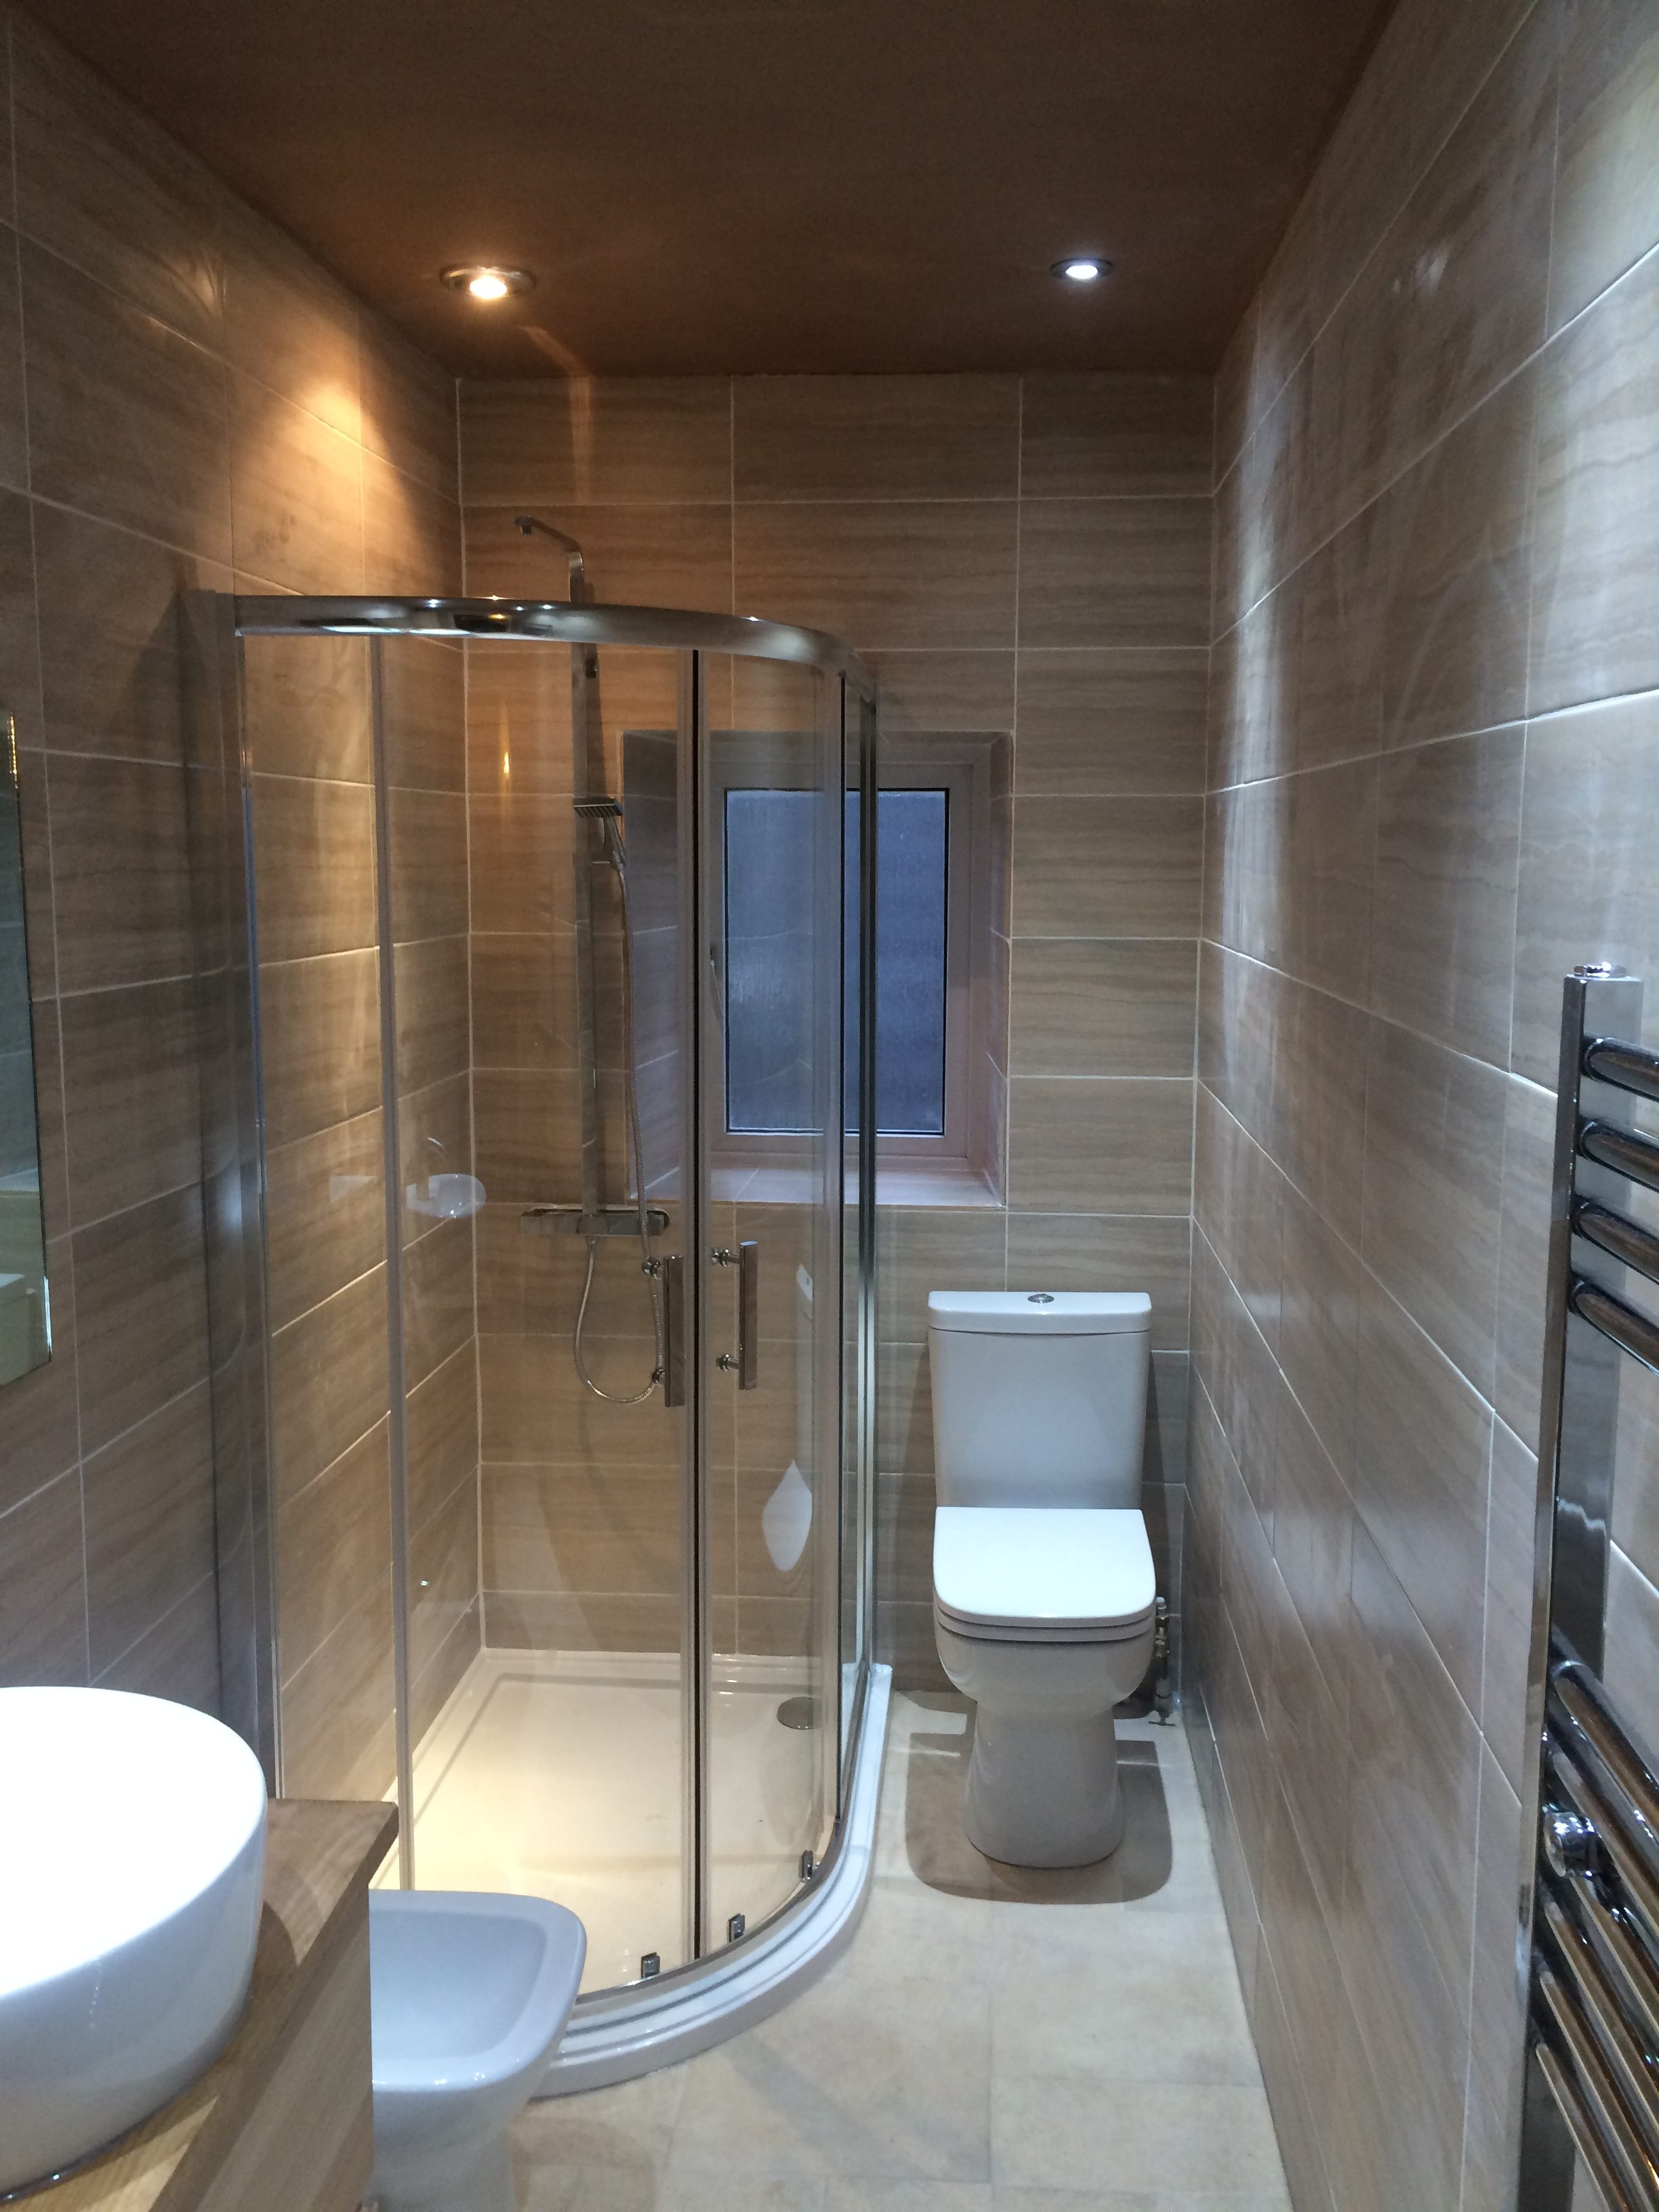 Shower and toilet in modern long bathroom